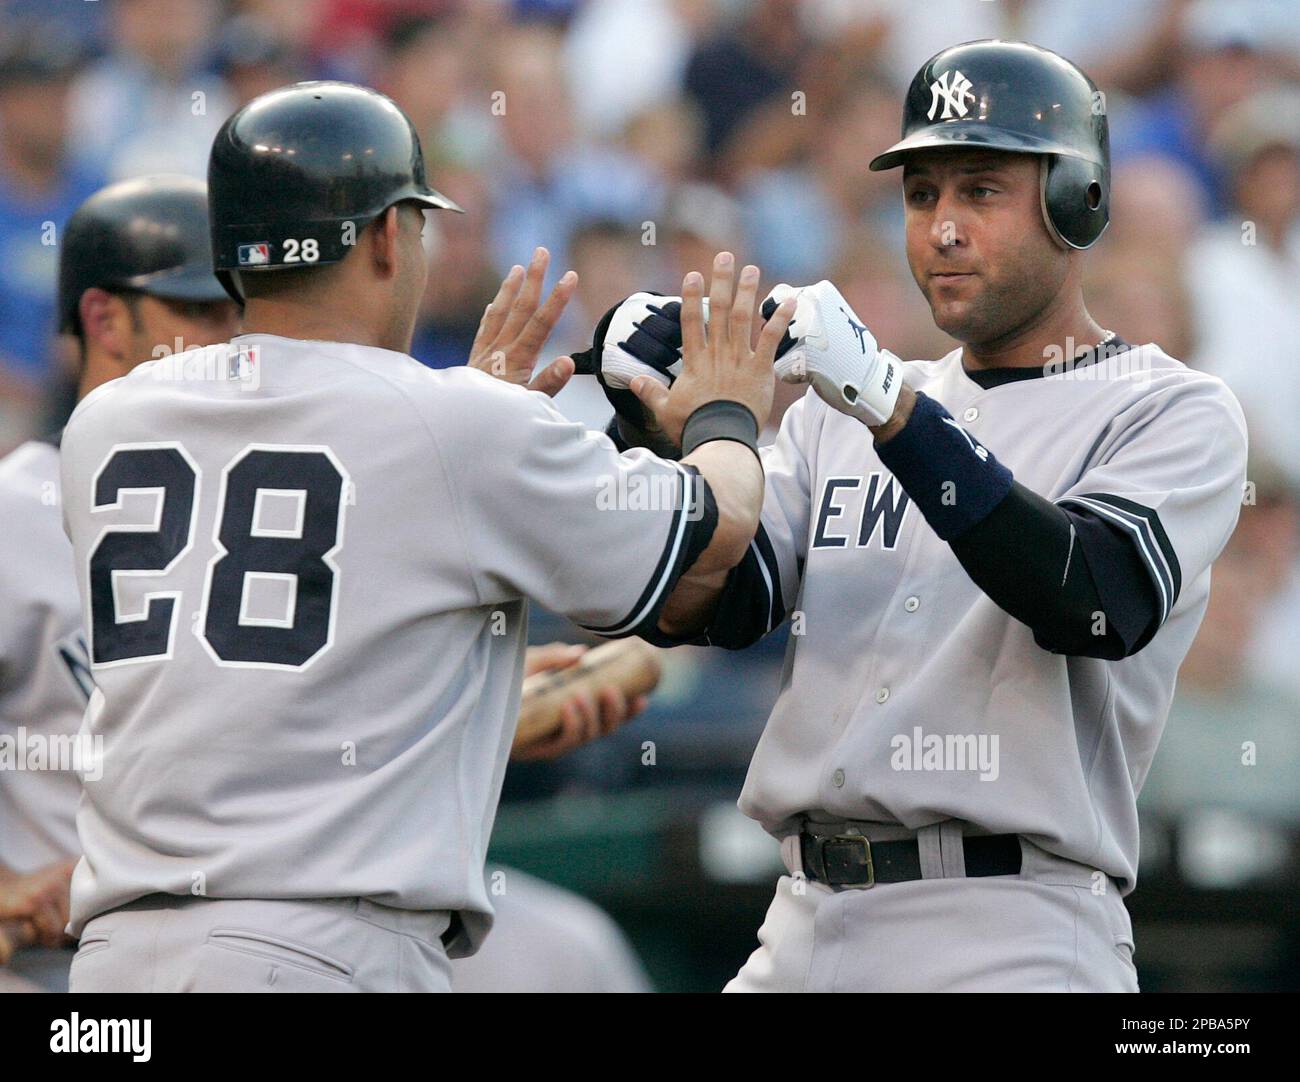 New York Yankees' Melky Cabrera, left, greets Derek Jeter after they both  scored on a single by Hideki Matsui in the first inning of a baseball game  with the Kansas City Royals